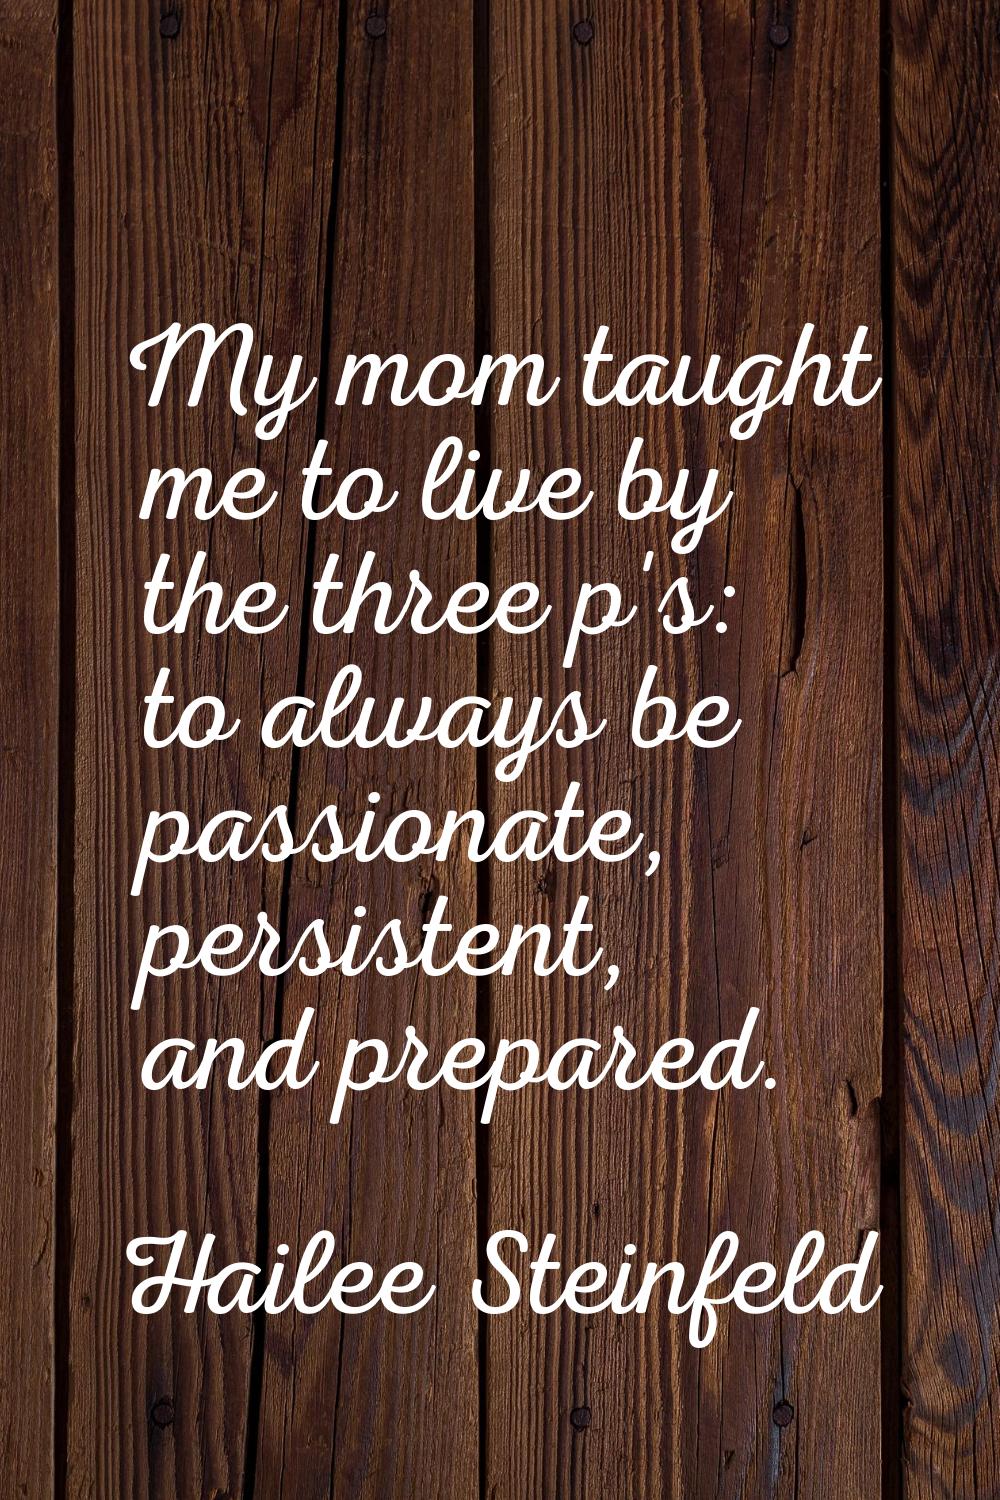 My mom taught me to live by the three p's: to always be passionate, persistent, and prepared.